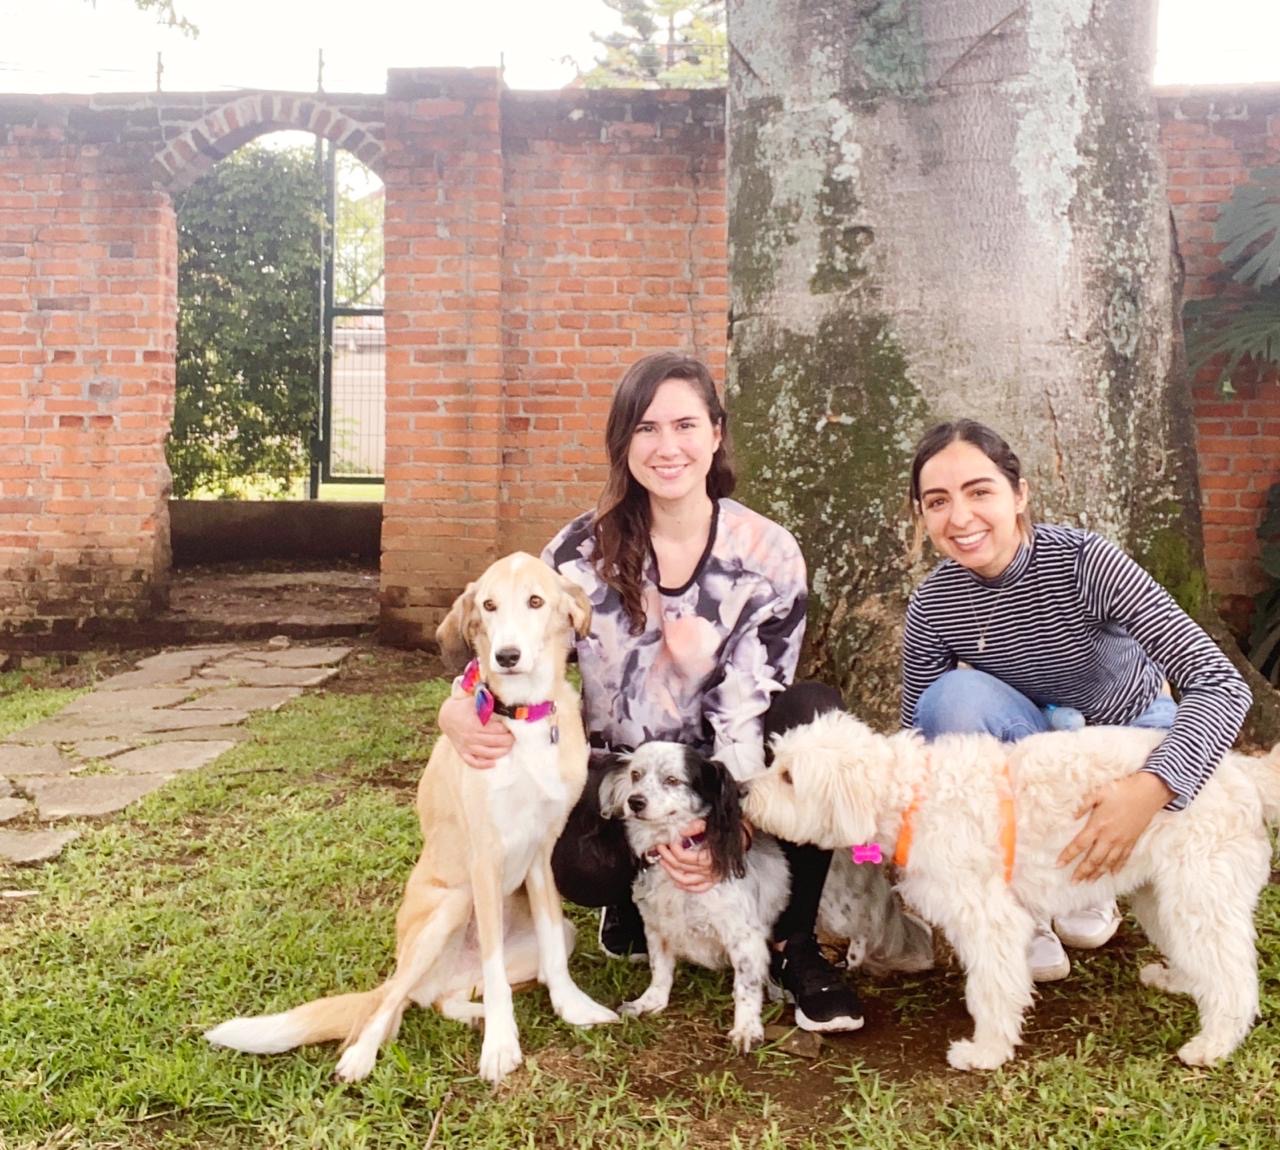 two young brunette women with their 3 rescued dogs. One dog is tall and beige, the other one is medium size with white and black fur, and the third one is small beige and fluffy